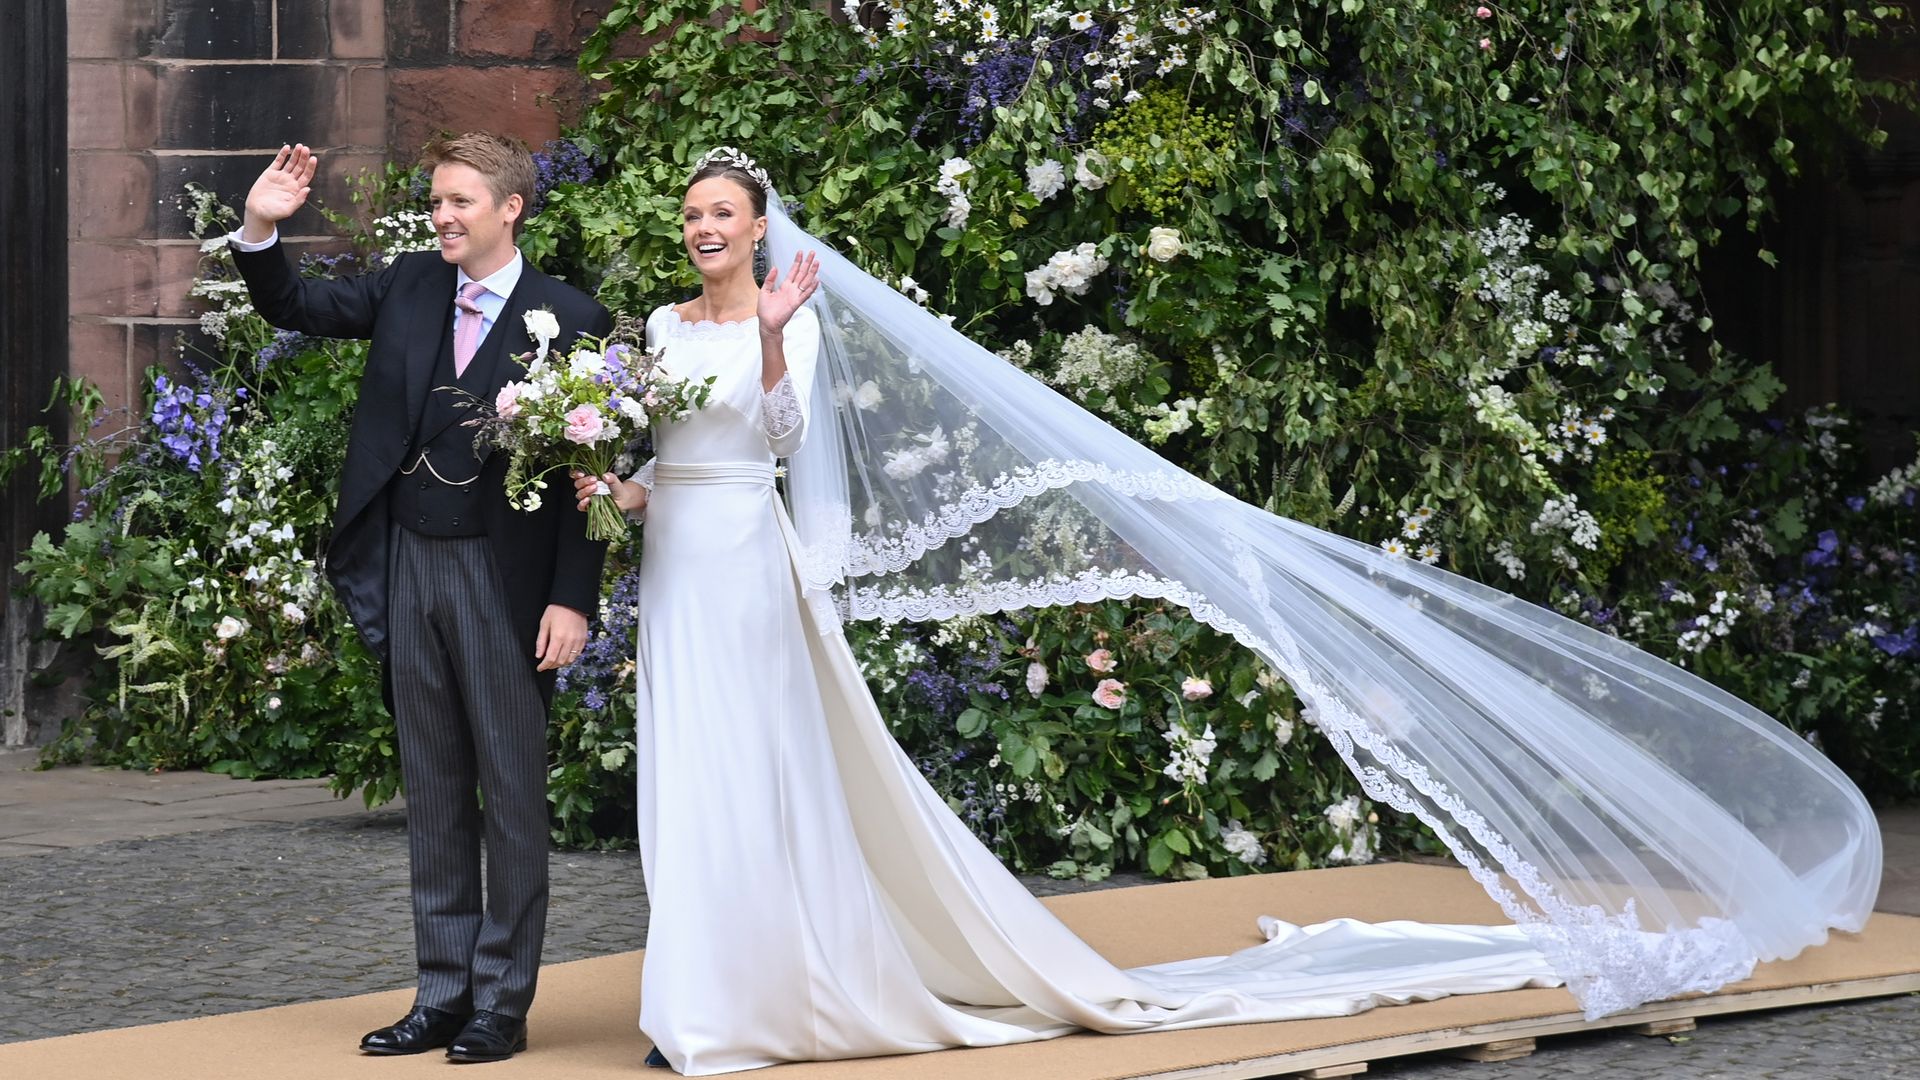 The couple waved to the big crowds after tying the knot